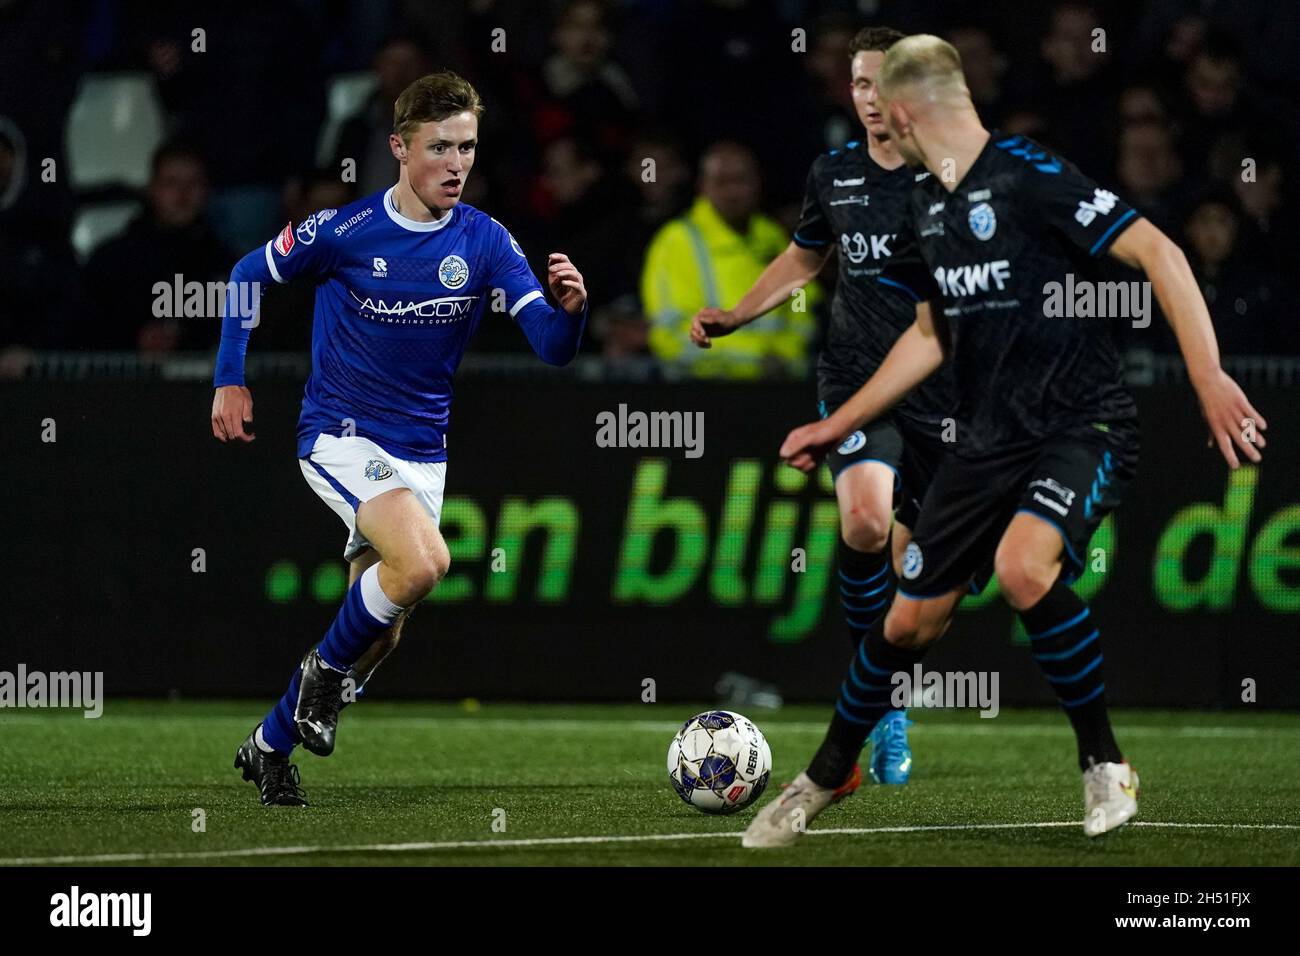 Fc den bosch hi-res stock photography and images - Alamy